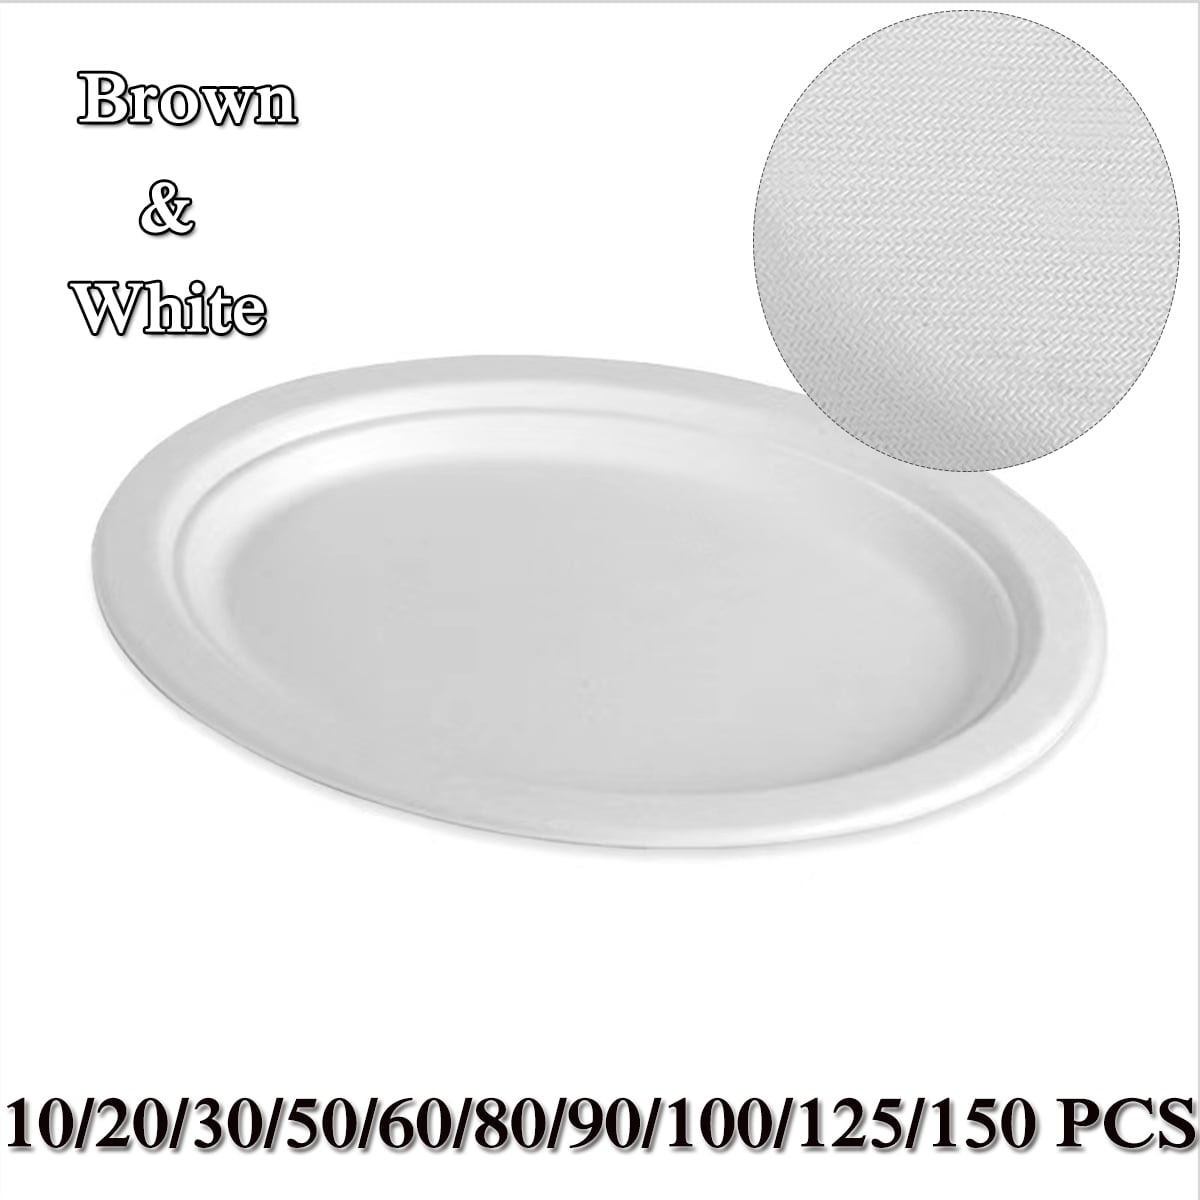  Maxcheck 300 Pcs Paper Plates Including 150 Pcs 9 Inch Heavy  Duty Printed Disposable Plates and 150 Pcs 7 Inch Soak Proof Disposable  Paper Plate for Everyday Use Family Gatherings Parties (